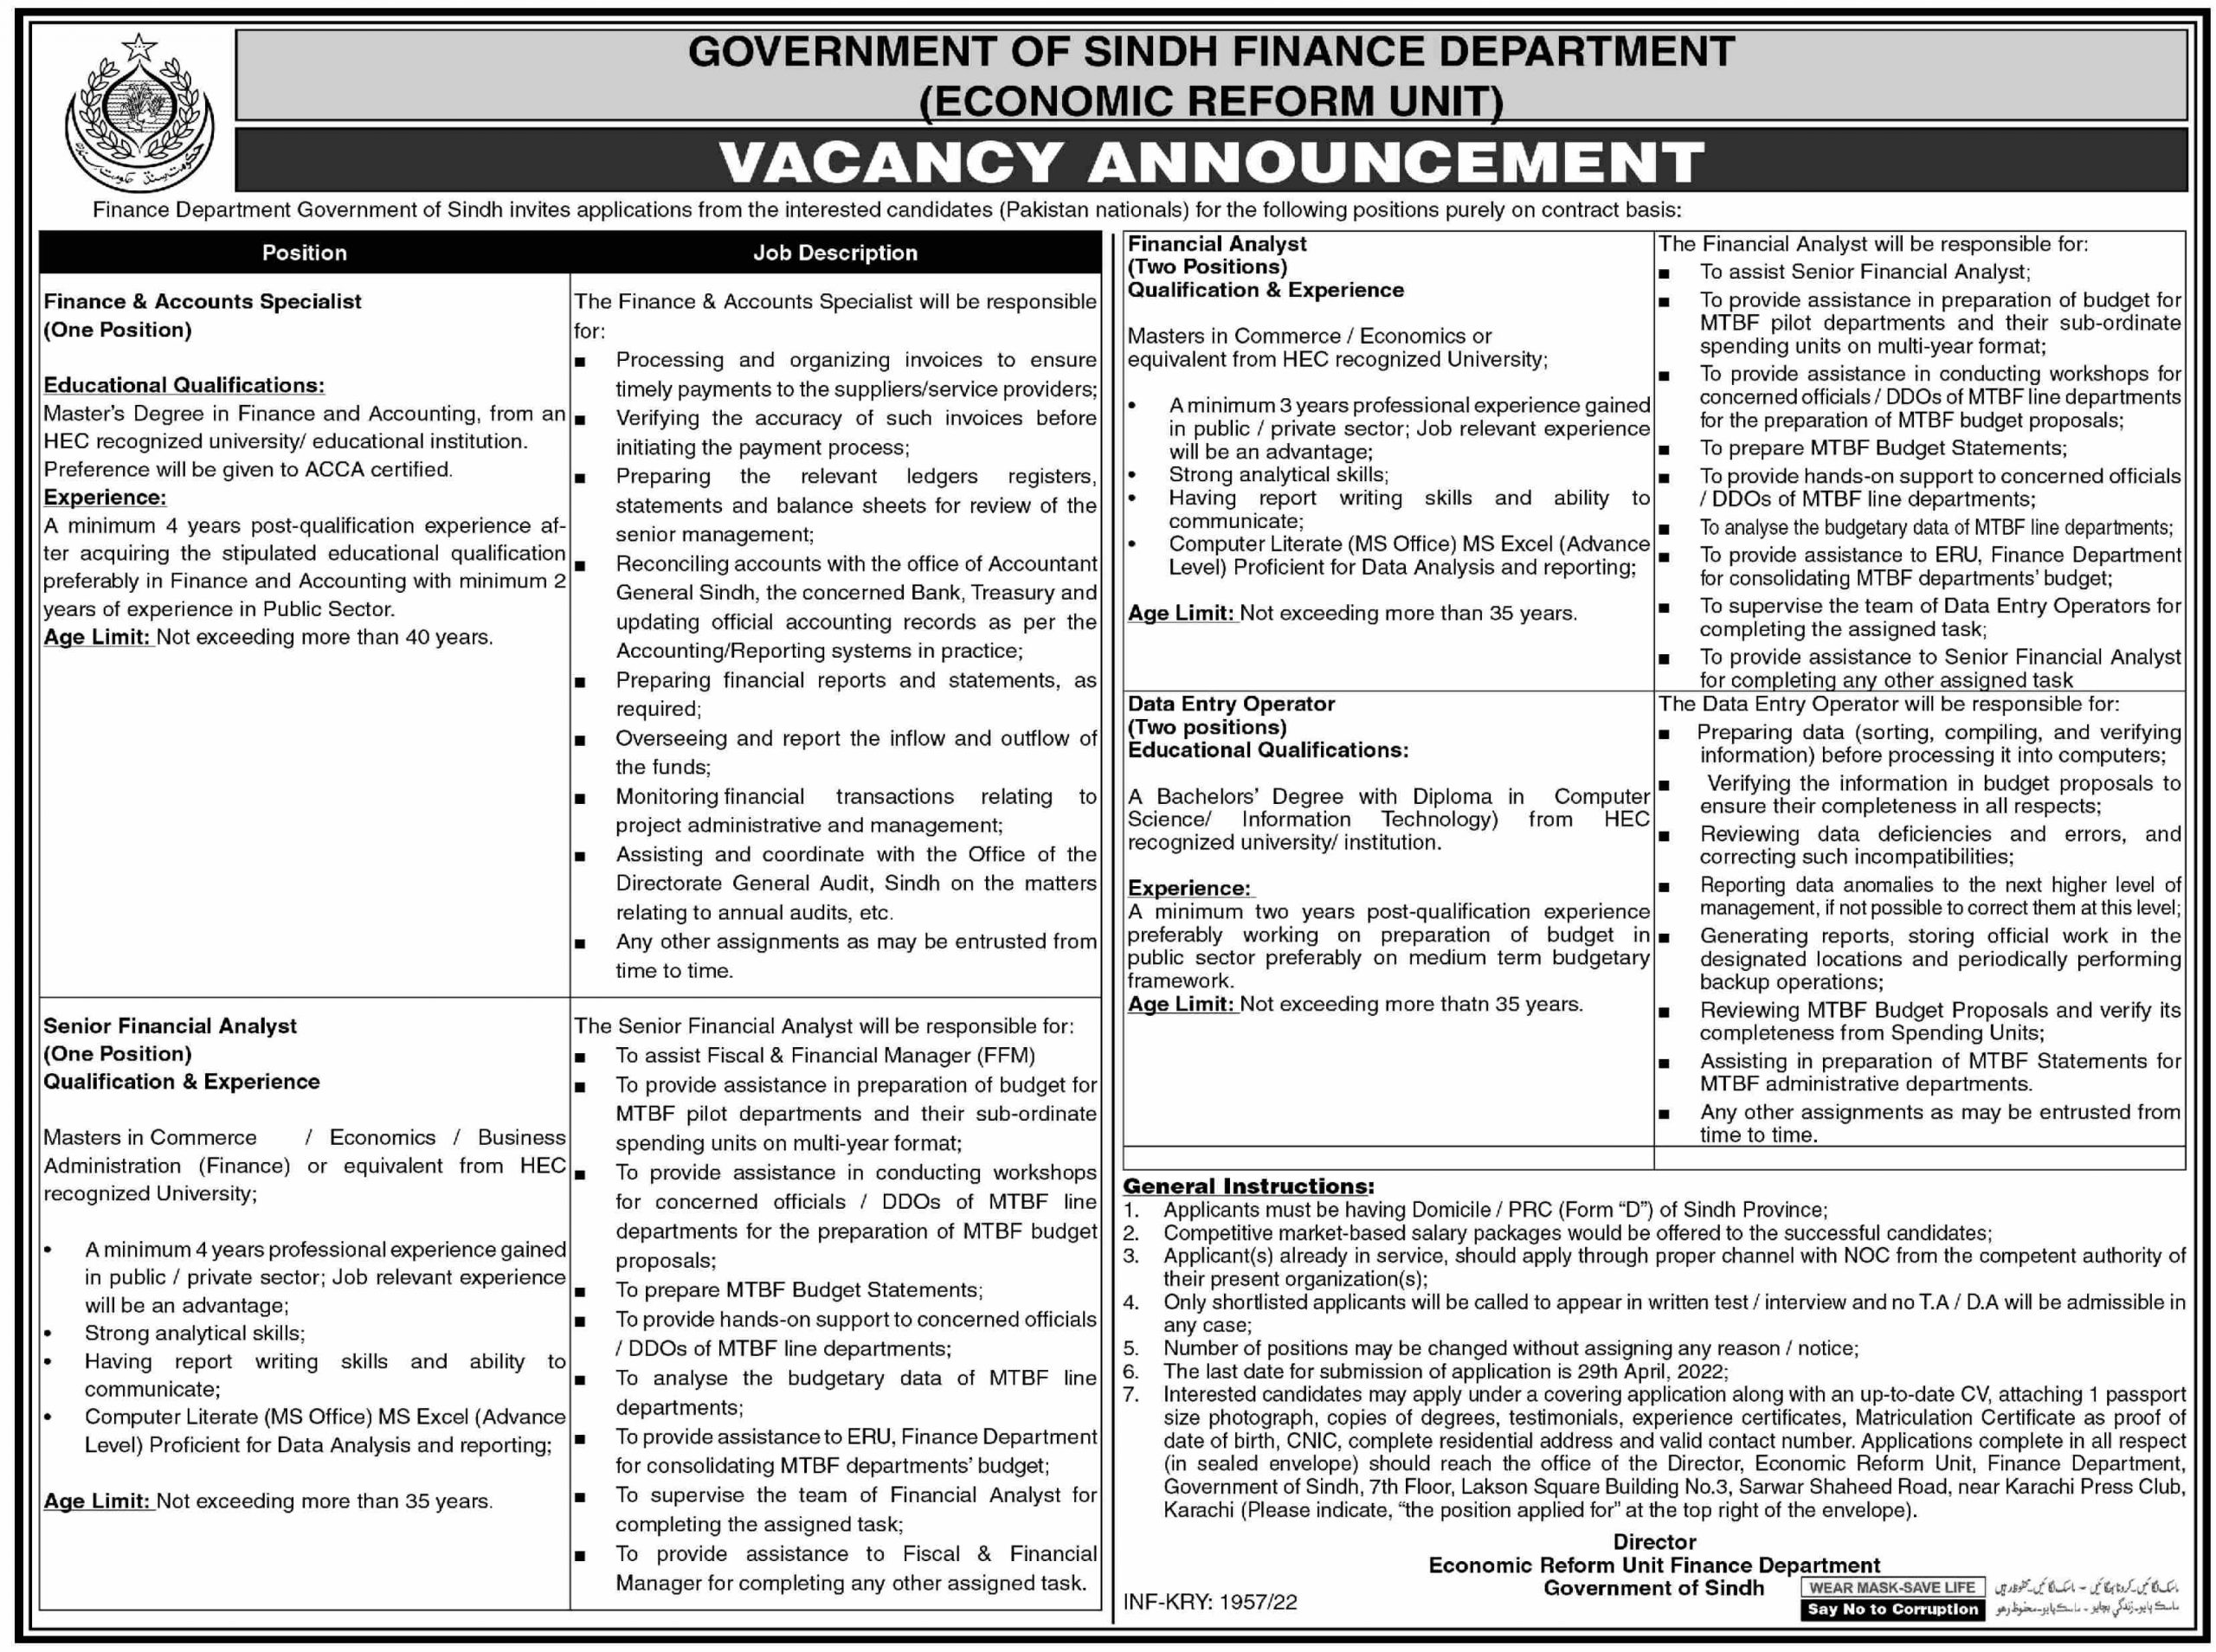 Finance Department Government of Sindh Jobs